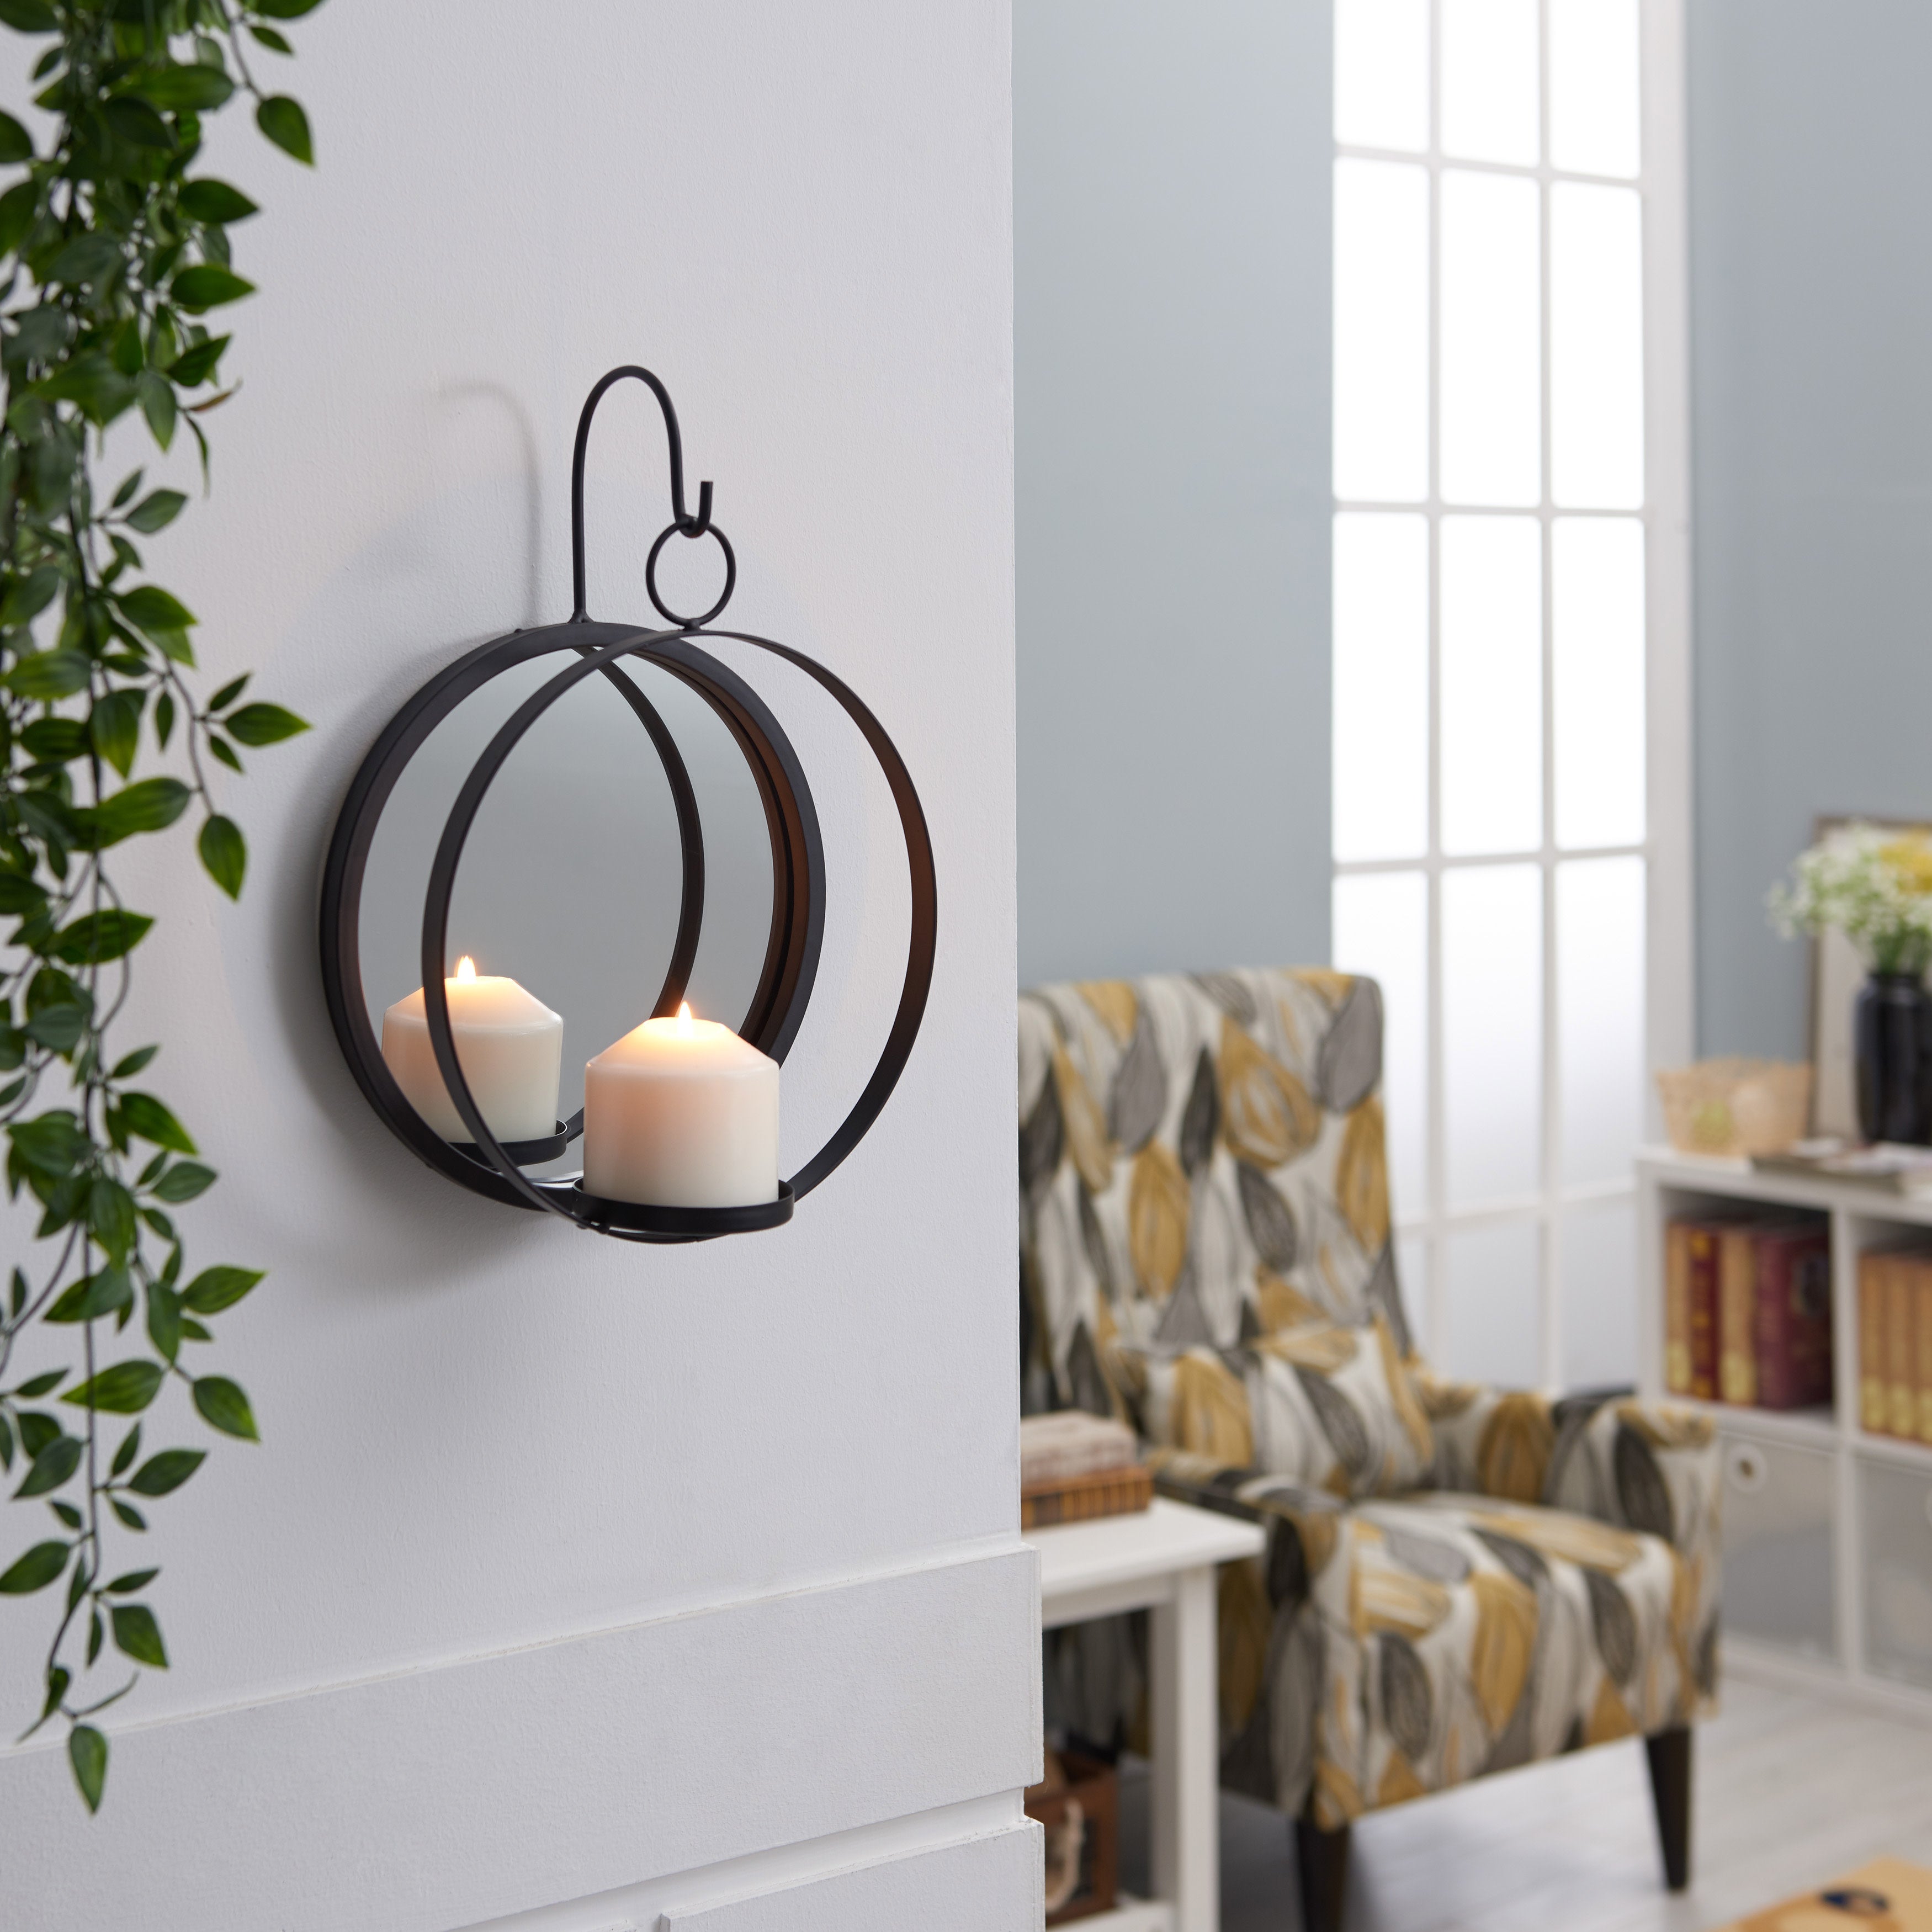 Elevate Your Space with Stylish Wall Mounted Candle Holders